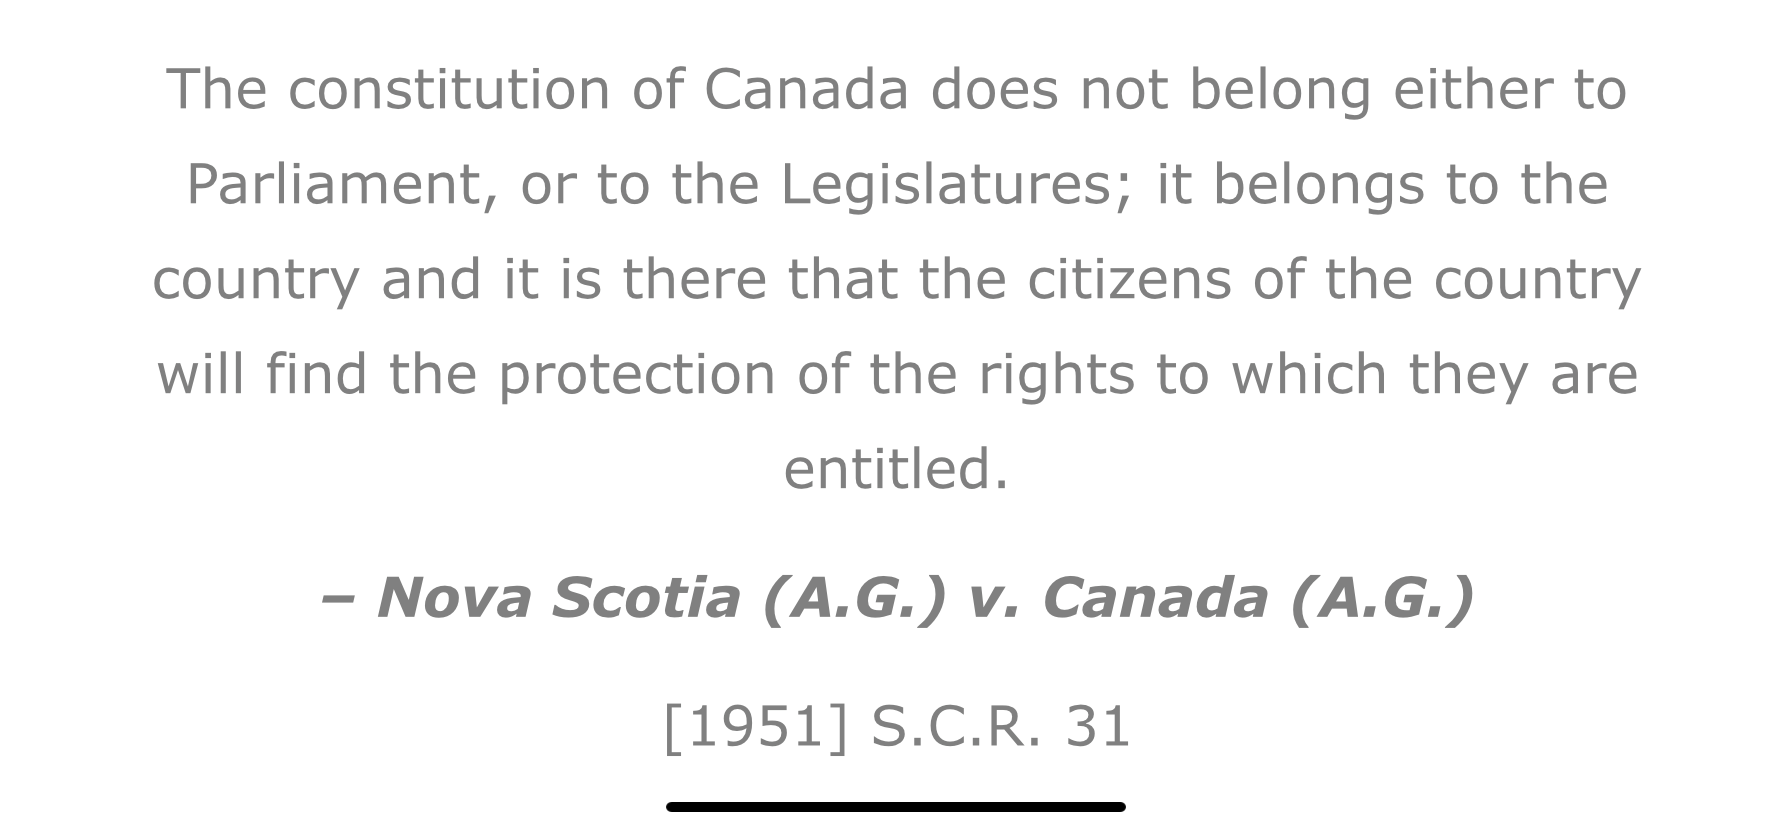 The constitution of Canada does not belong either to Parliament, or to the Legislatures; it belongs to the country and it is there that the citizens of the country will find the protection of the rights to which they are entitled